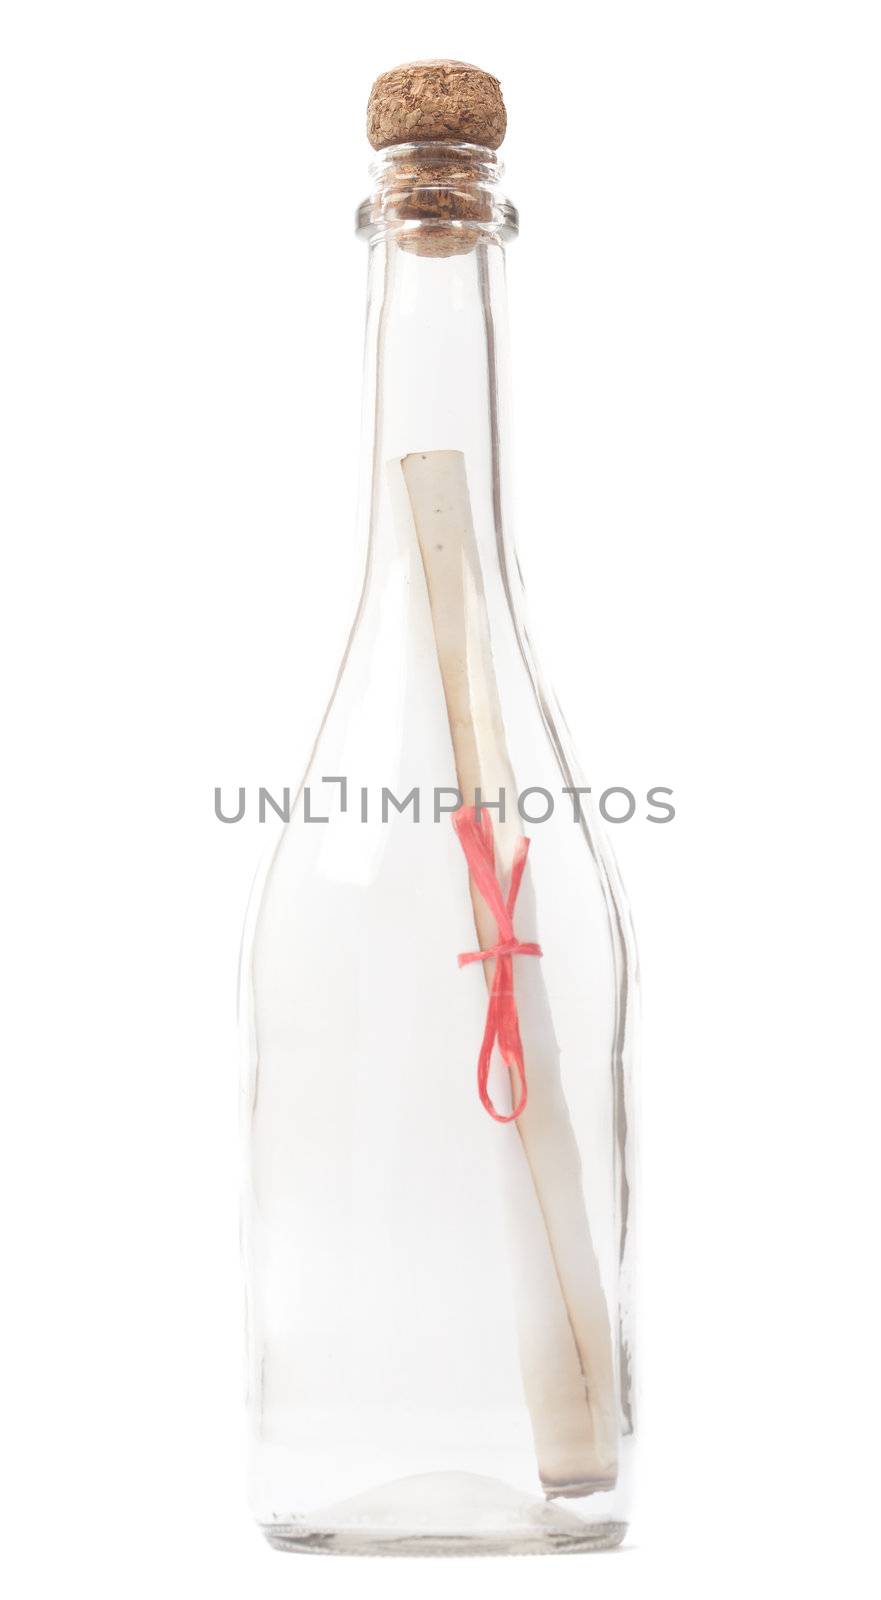 A message inside a glass bottle, isolated on a white background.